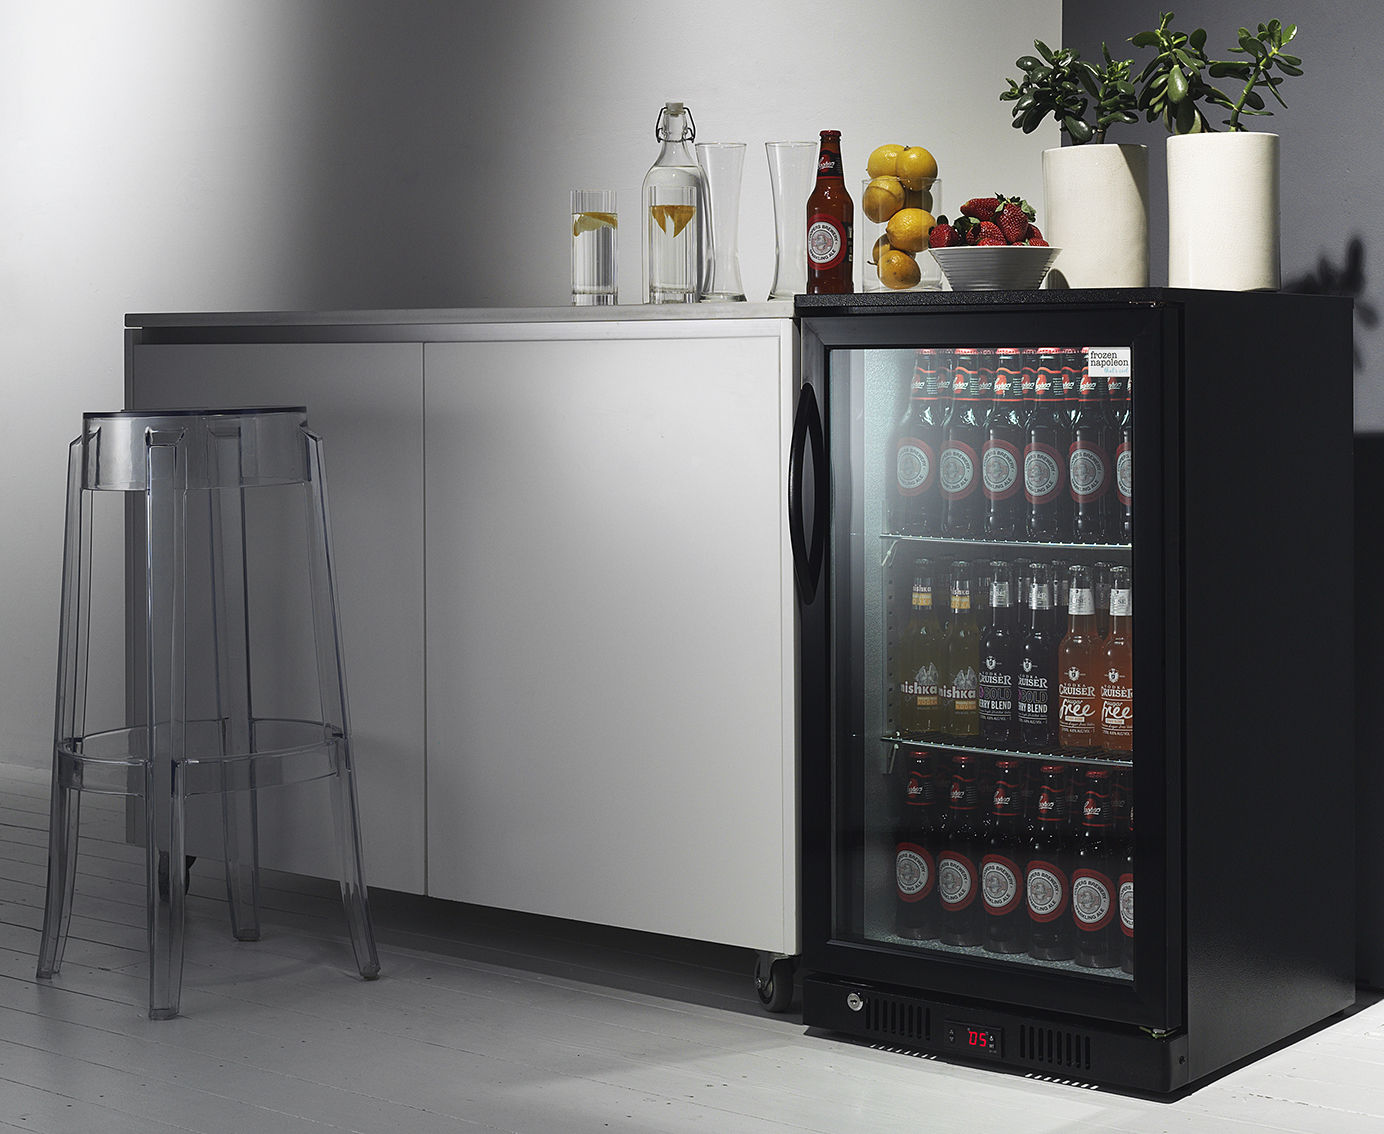 Display With Walls Lovely Bar Display With White Painted Walls White Marble Floor Stylish Bar Stool And Black Glass Door Bar Fridge Decoration Stylish Glass Door Fridge To See What Is Inside